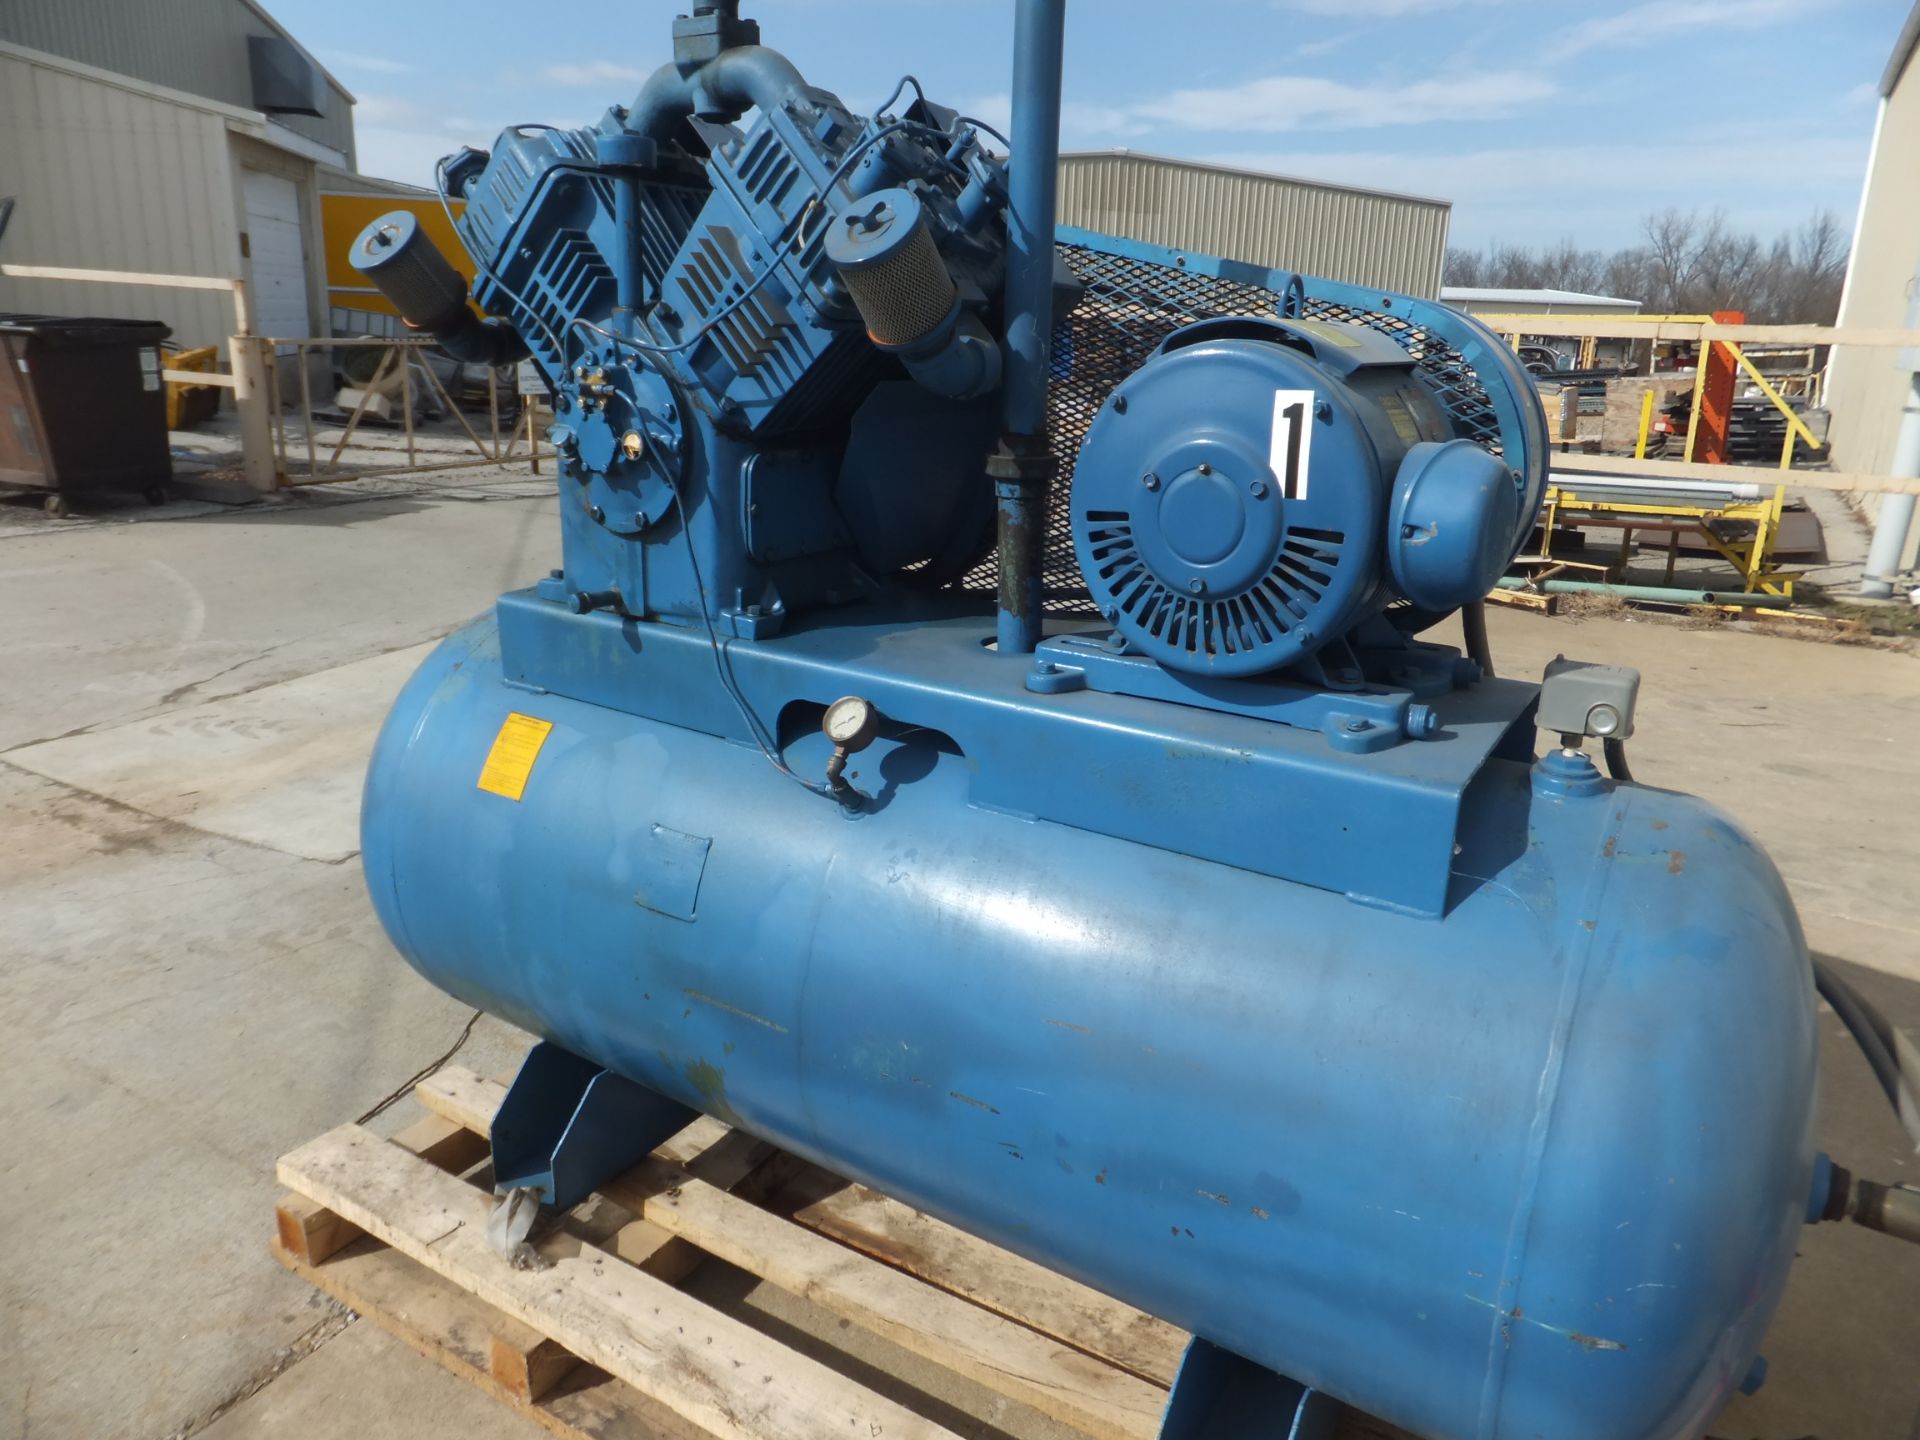 Quincy 25 Hp Reciprocating Air Compressor, Model 5120, S/N 160353 L, Size 6 & 3-1/4 x 4, Lincoln - Image 3 of 10